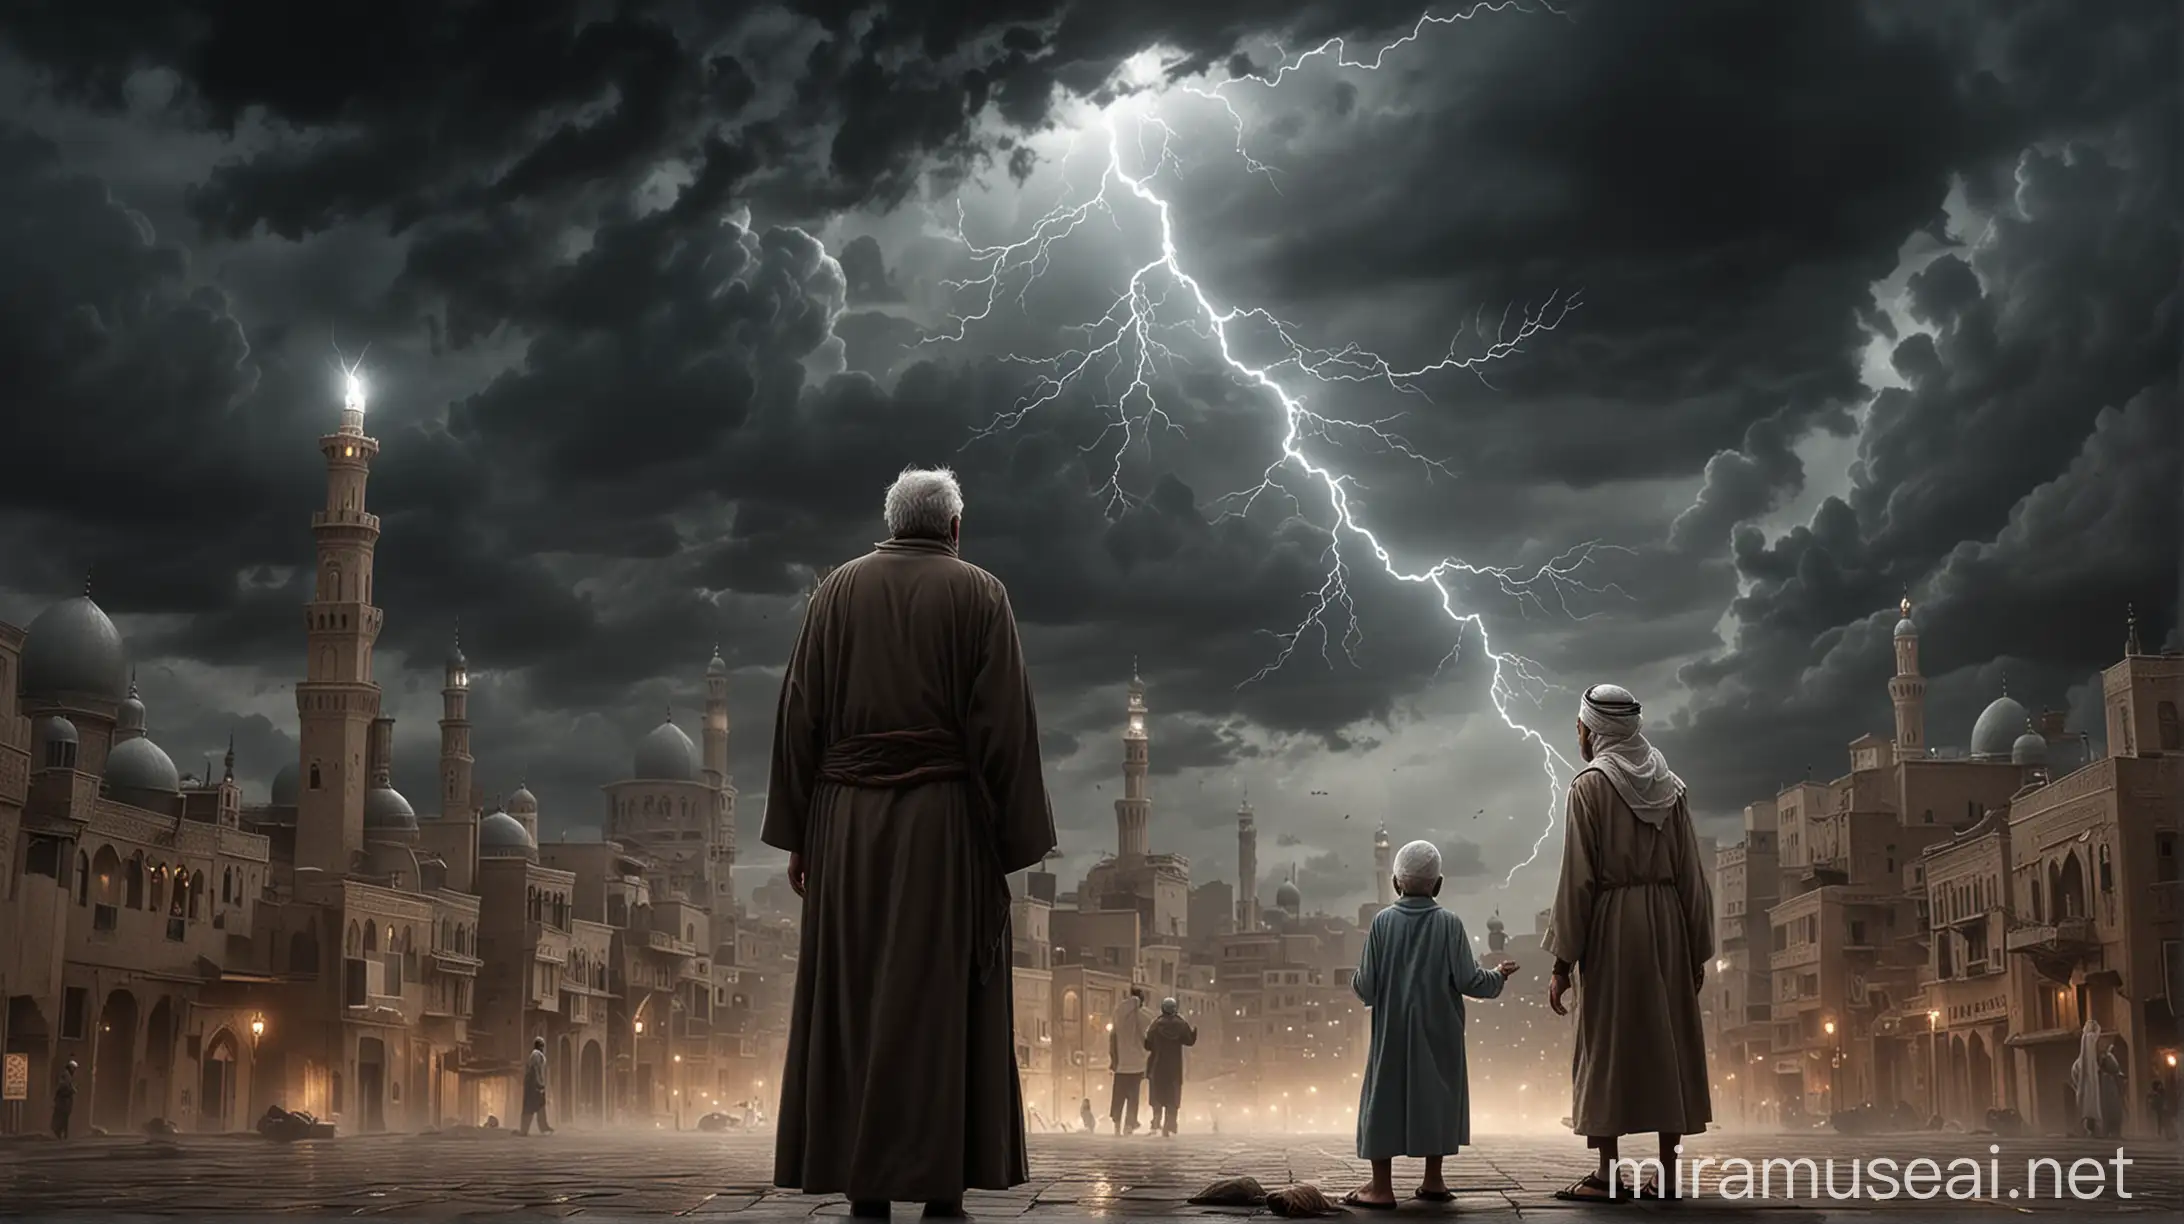 Teaching Children the Power of Allah Under a Stormy Sky